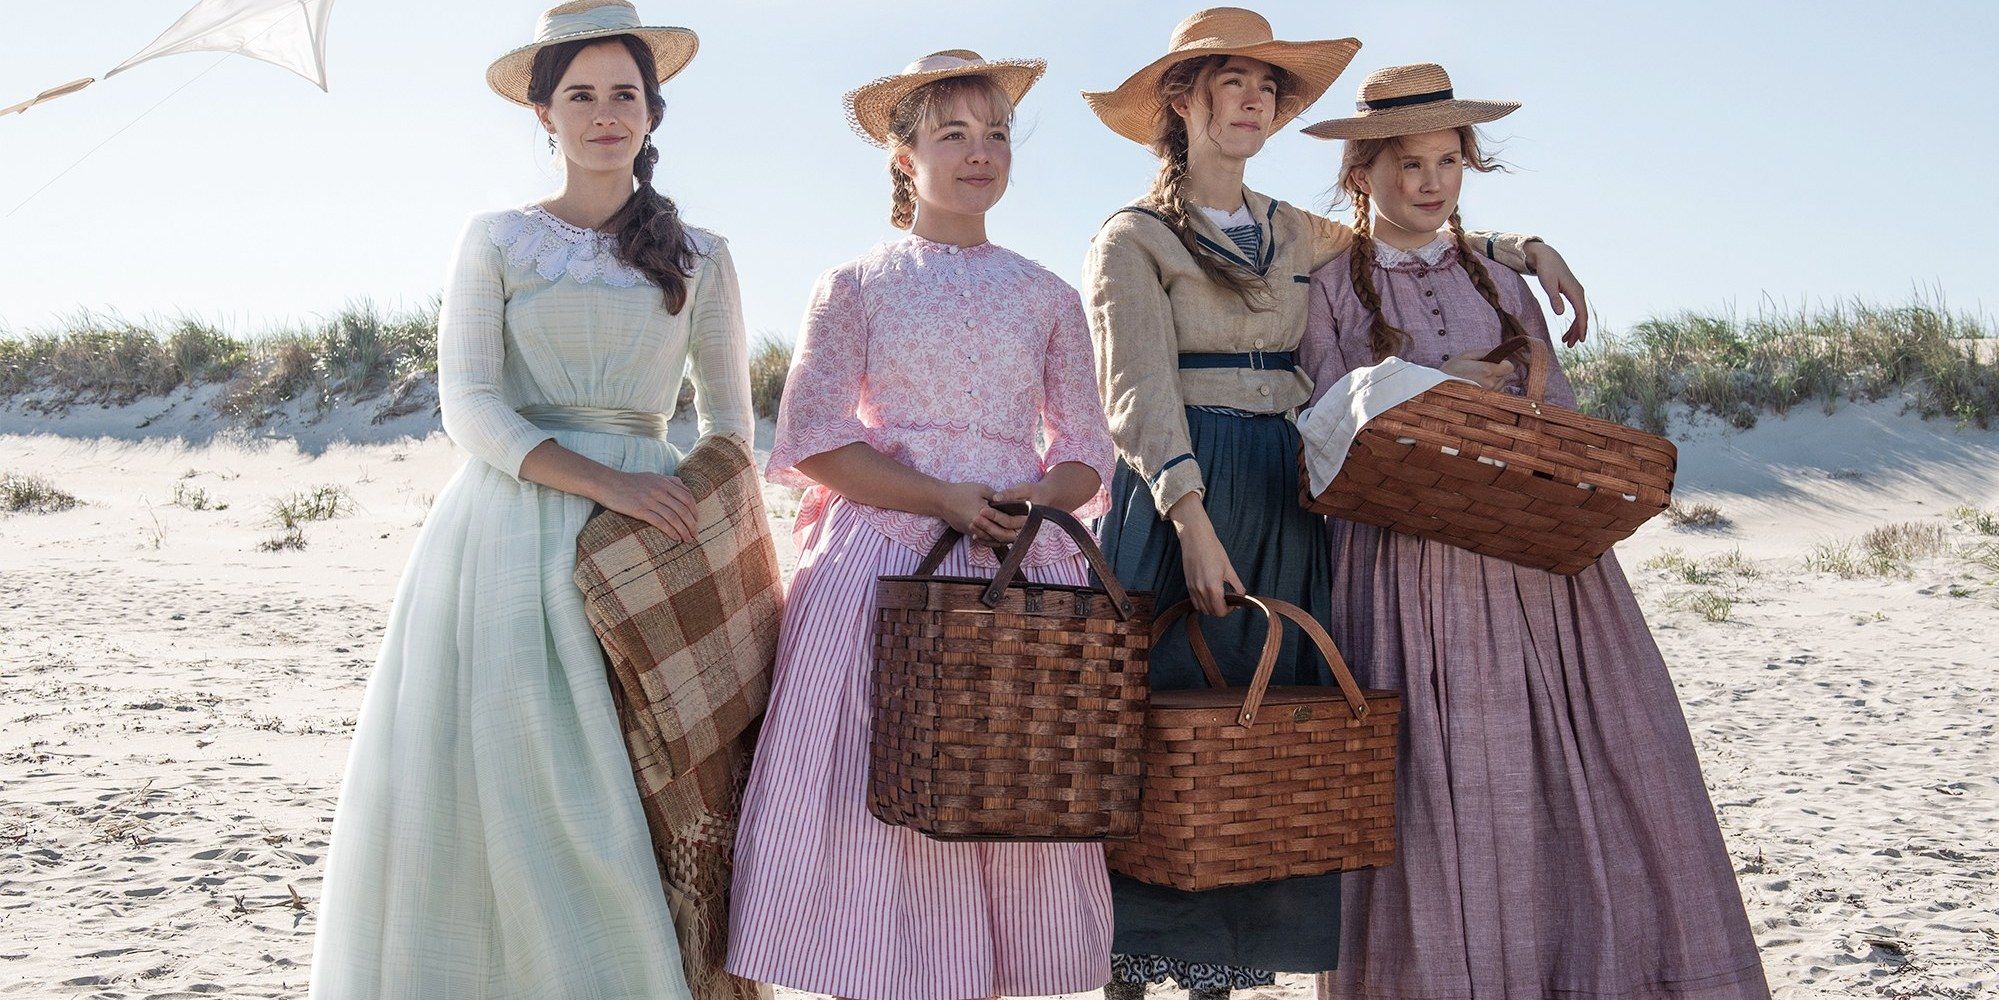 The March sisters holding picnic baskets at the beach in the film Little Women.